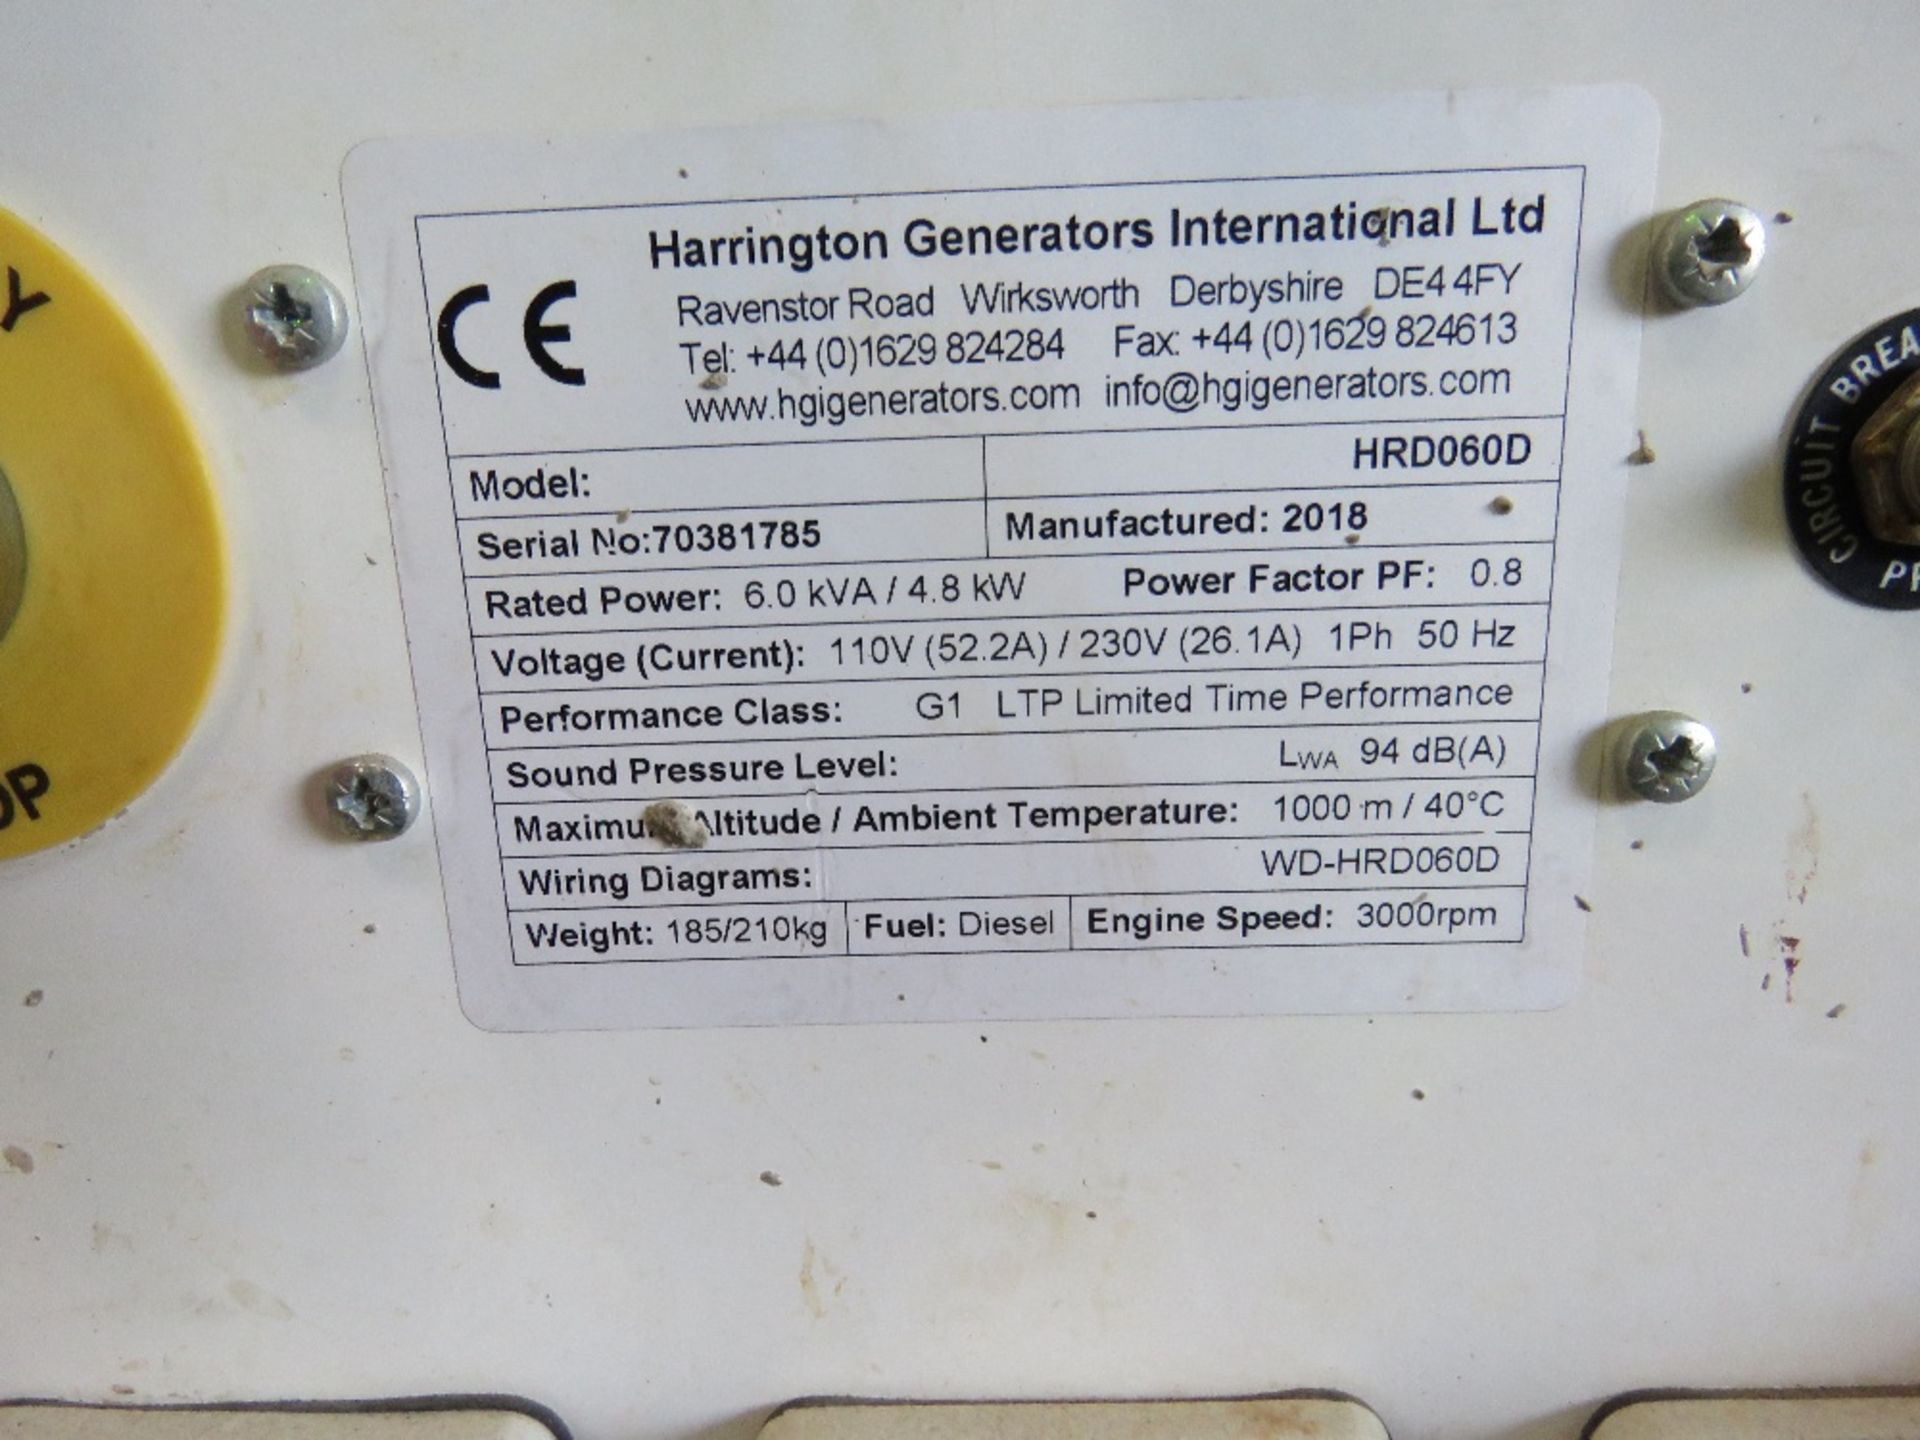 HGI 6KVA BARROW GENERATOR, YEAR 2018. 1156 REC HOURS. WHEN TESTED WAS SEEN TO RUN AND MAKE POWER. - Image 3 of 6